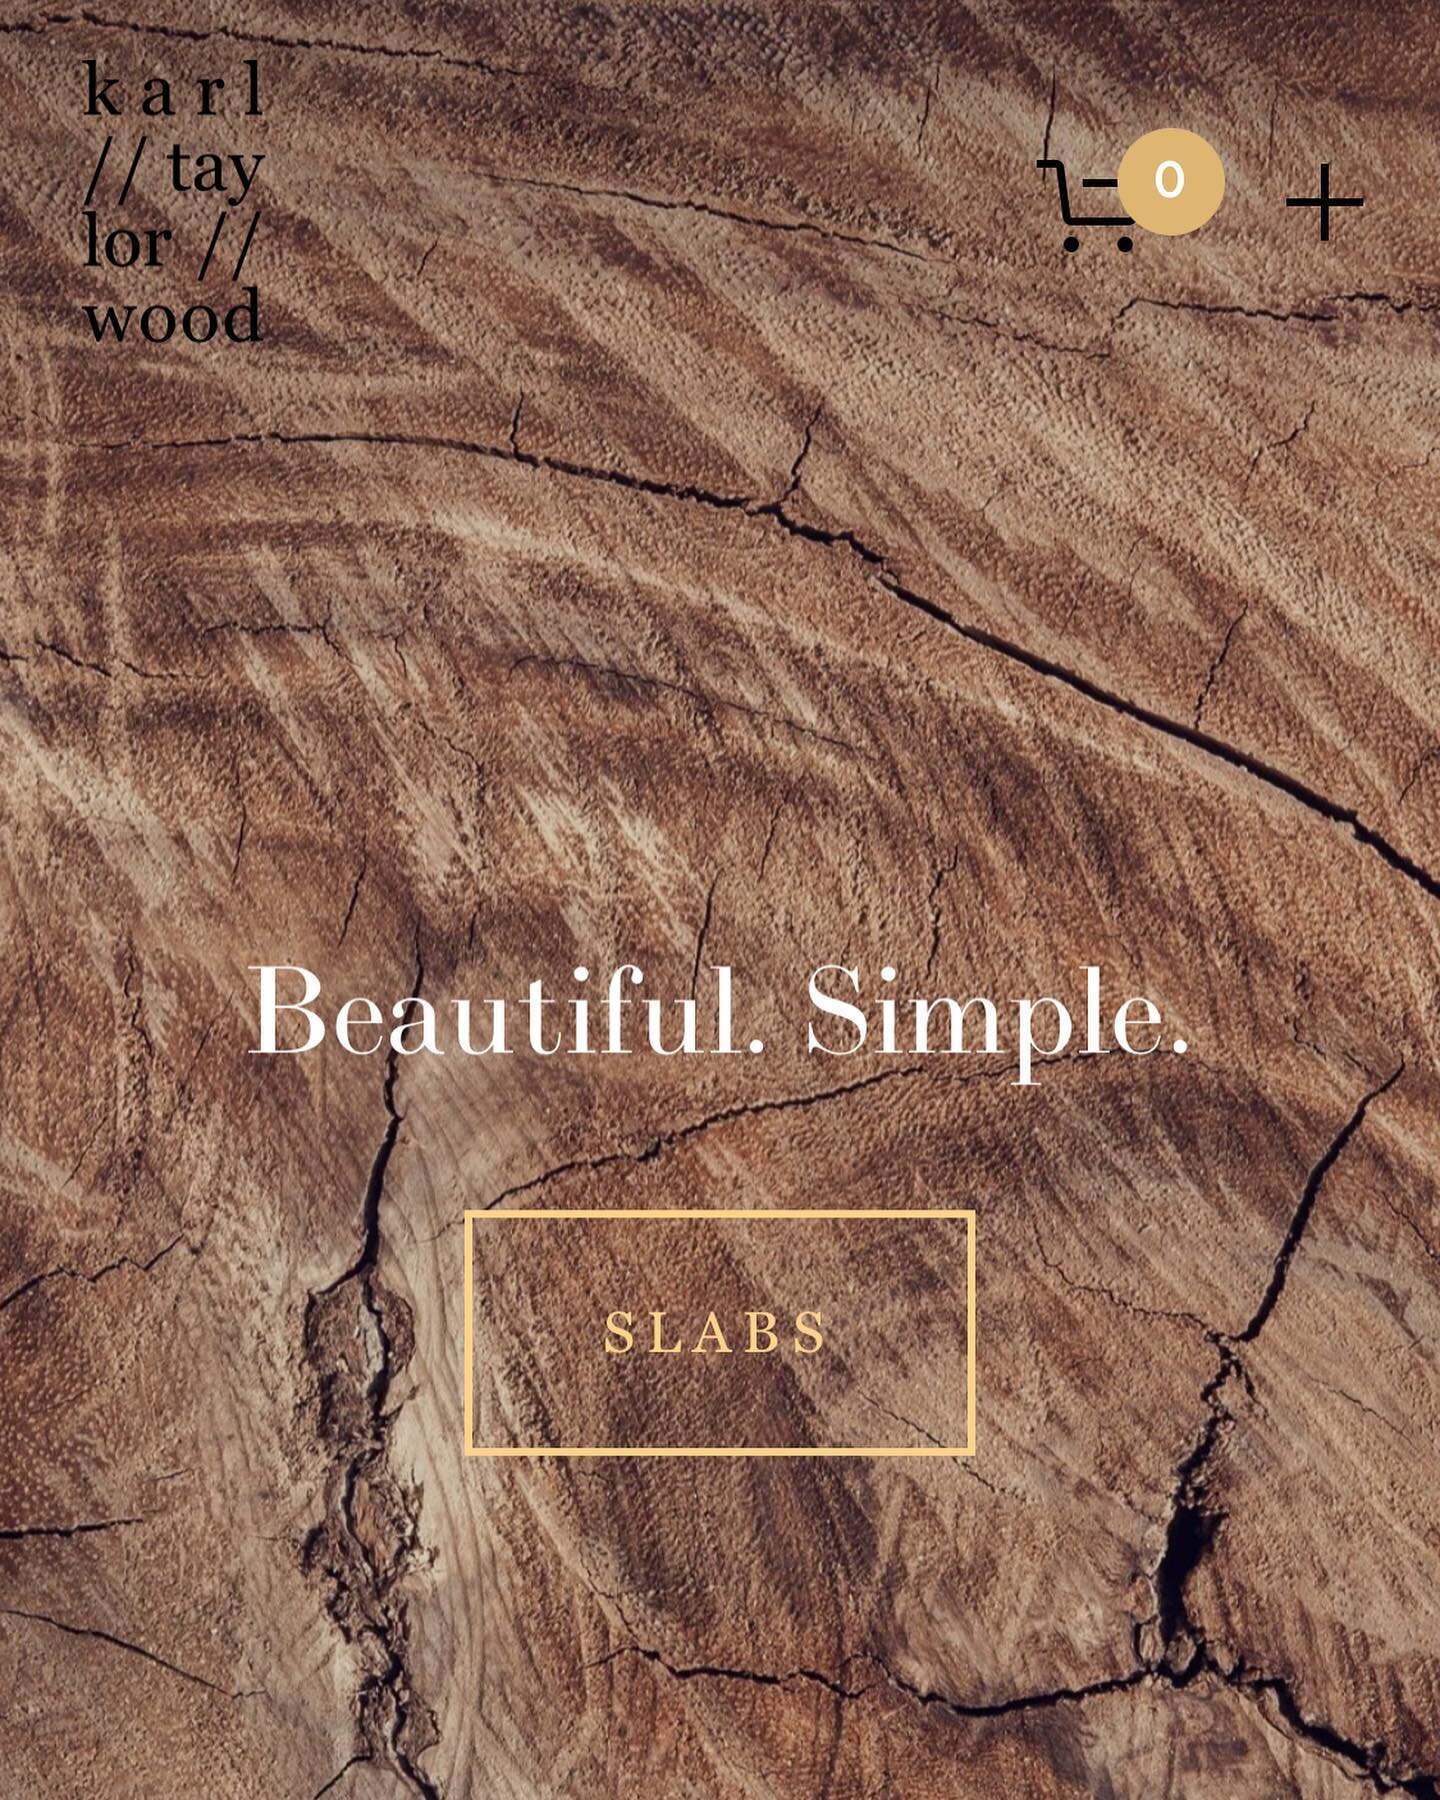 We&rsquo;ve been working on making it  easier to find the next slab for your project. Take a look through our online catalogue of slabs to find the one you have been looking for. #karltaylorwood #webdesign #store #slabs #cookies #furniture